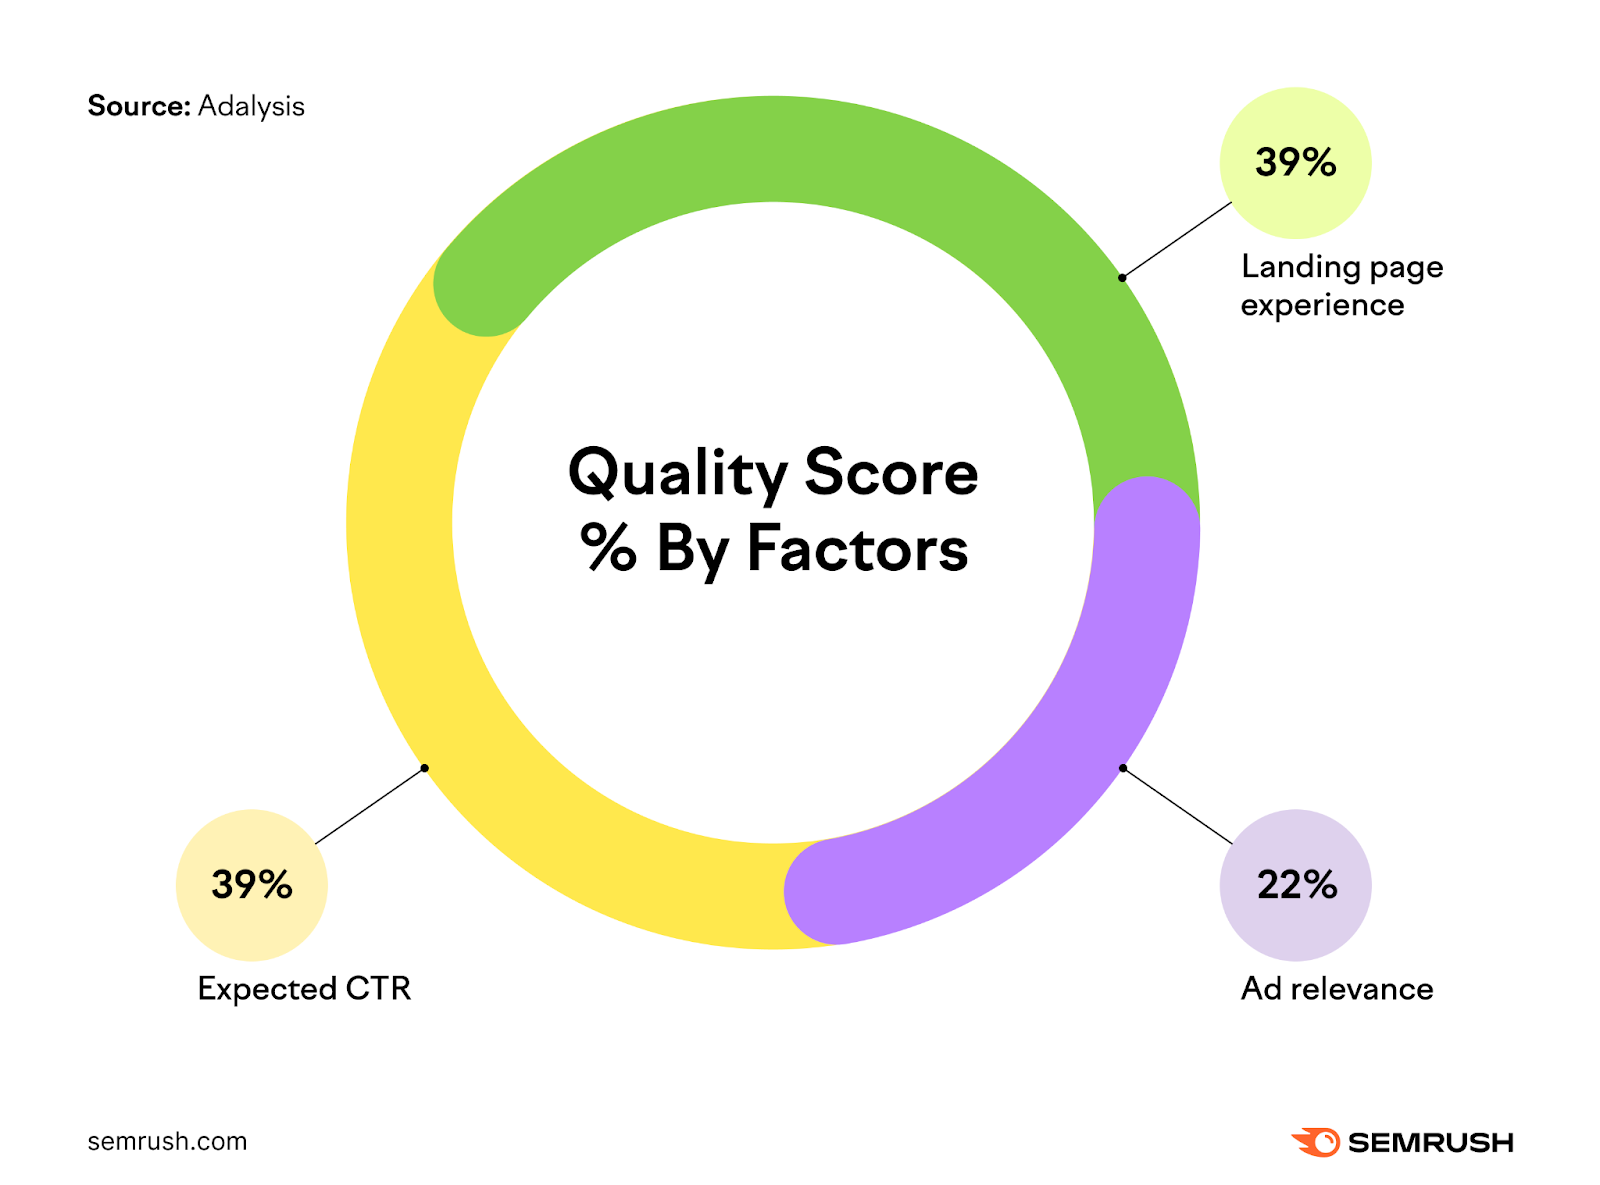 An infographic showing quality score % by factors: expected CTR (39%), landing page experience (39%) and ad relevance (22%)